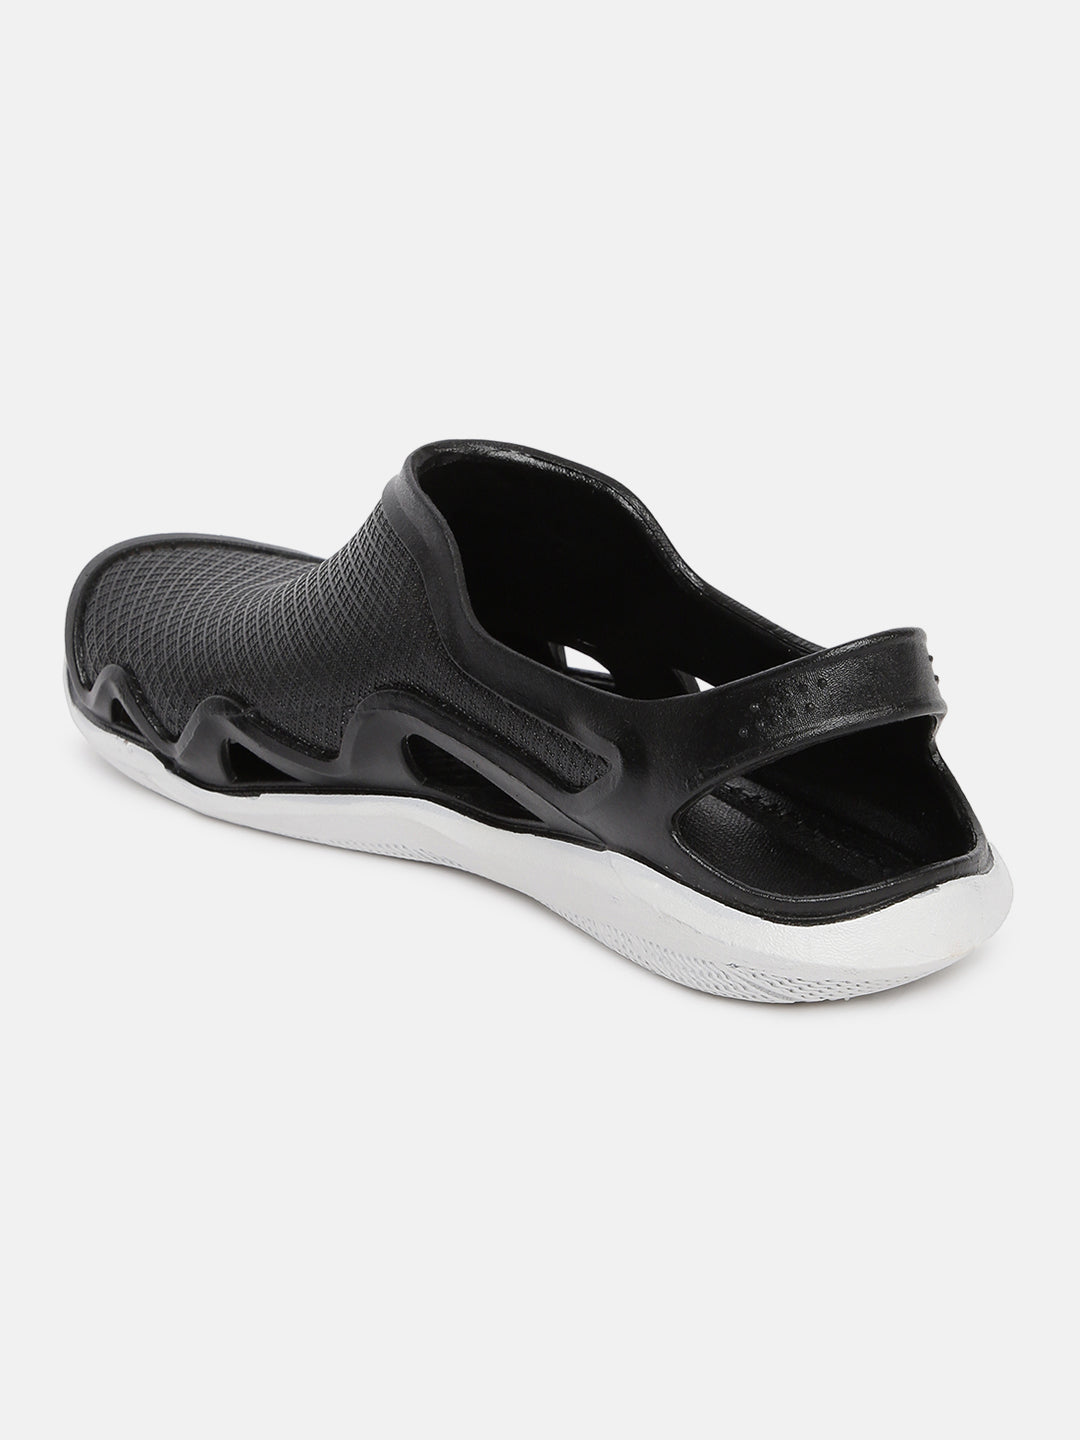 Paragon RK10902G Men Casual Clogs | Stylish, Anti-Skid, Durable | Casual &amp; Comfortable | For Everyday Use